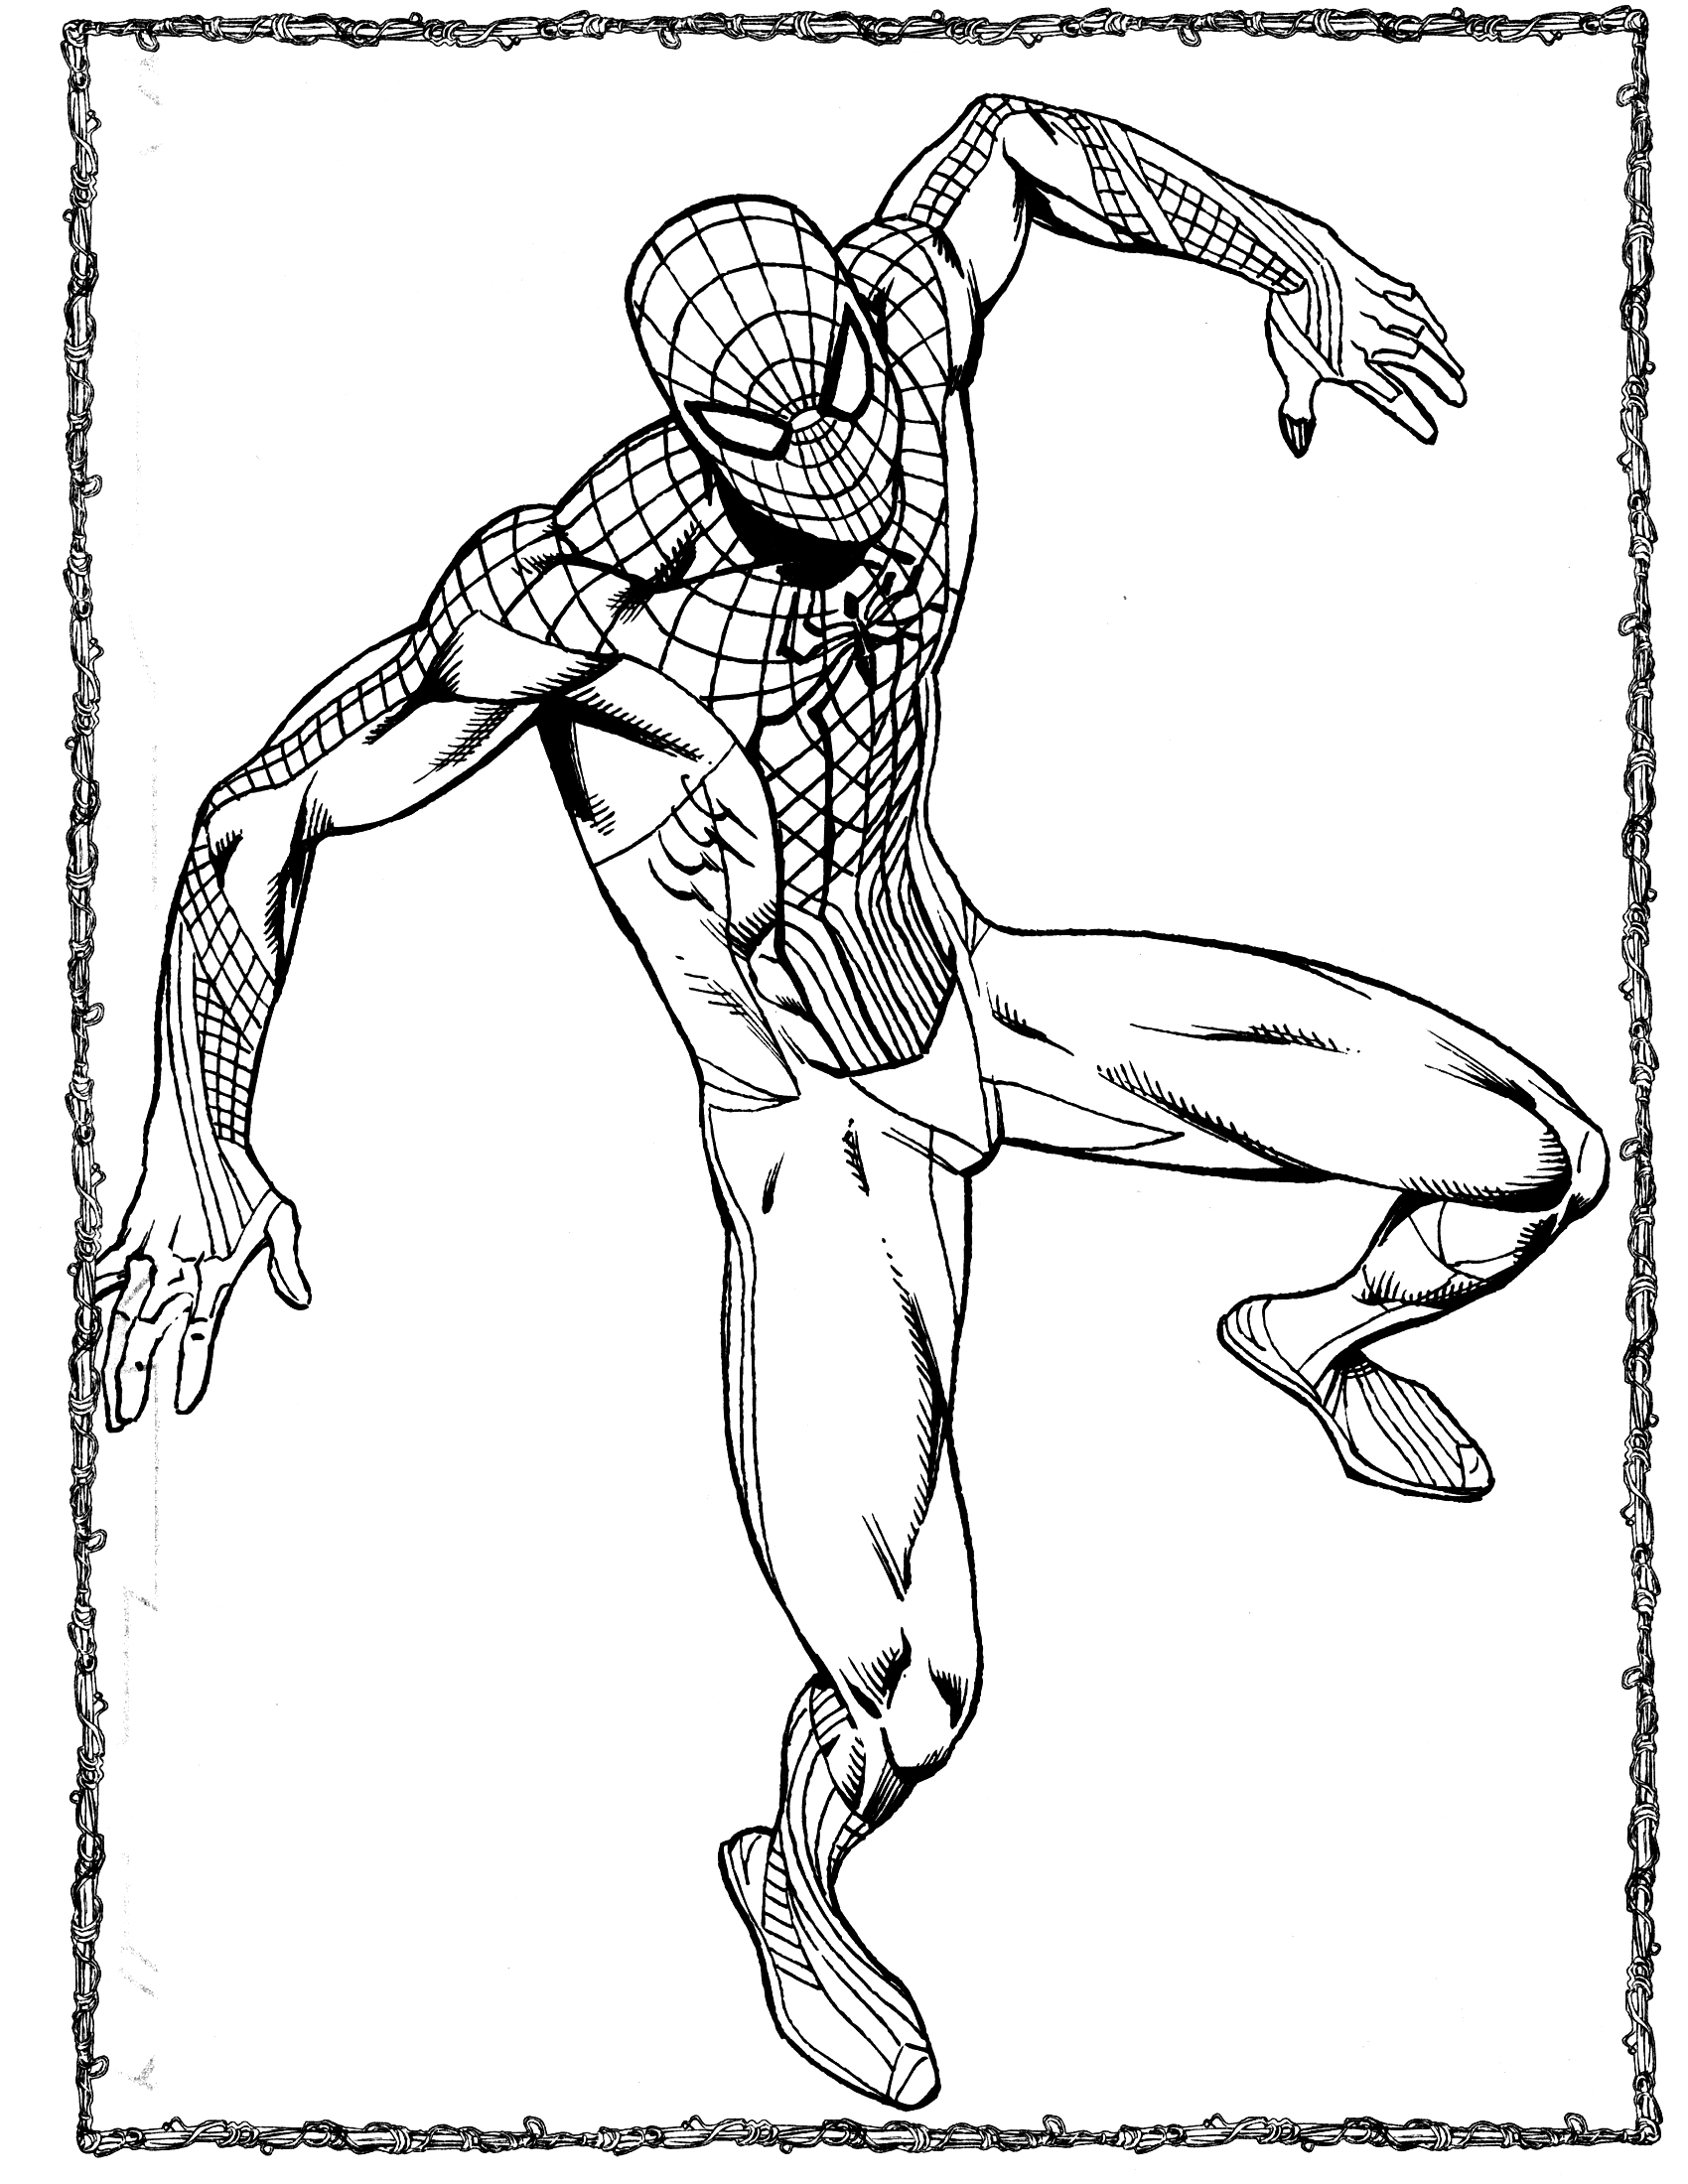 the-amazing-spider-man-2-coloring-pages-at-getcolorings-free-printable-colorings-pages-to